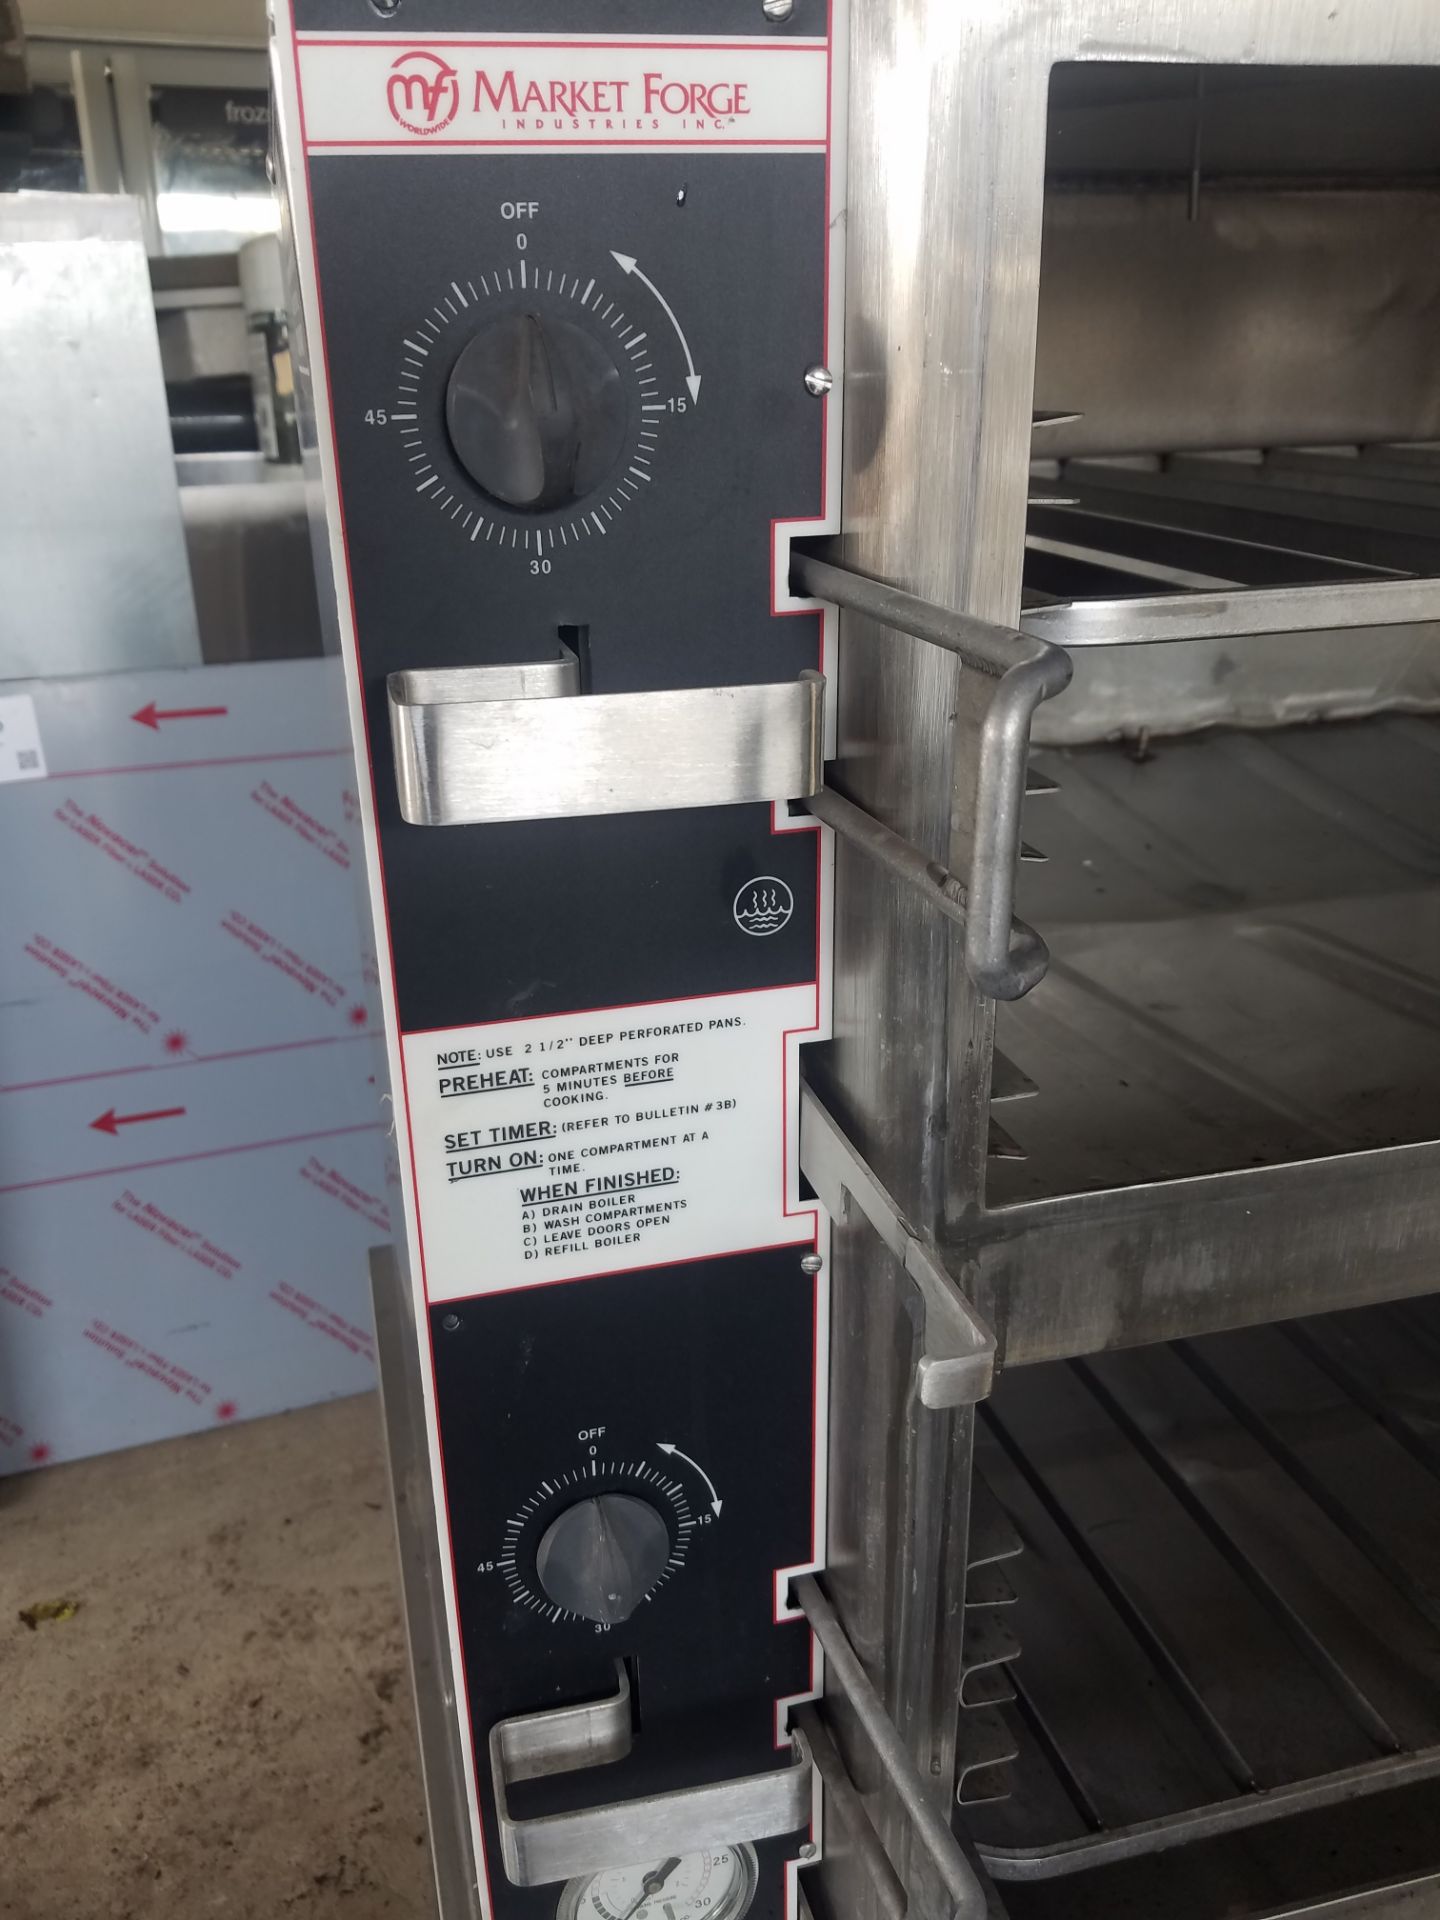 Market Forge Gas Steam Oven, Model 2A1, S/N 216508 (Rigging, Loading & Site Management Fee $50.00 - Image 4 of 5